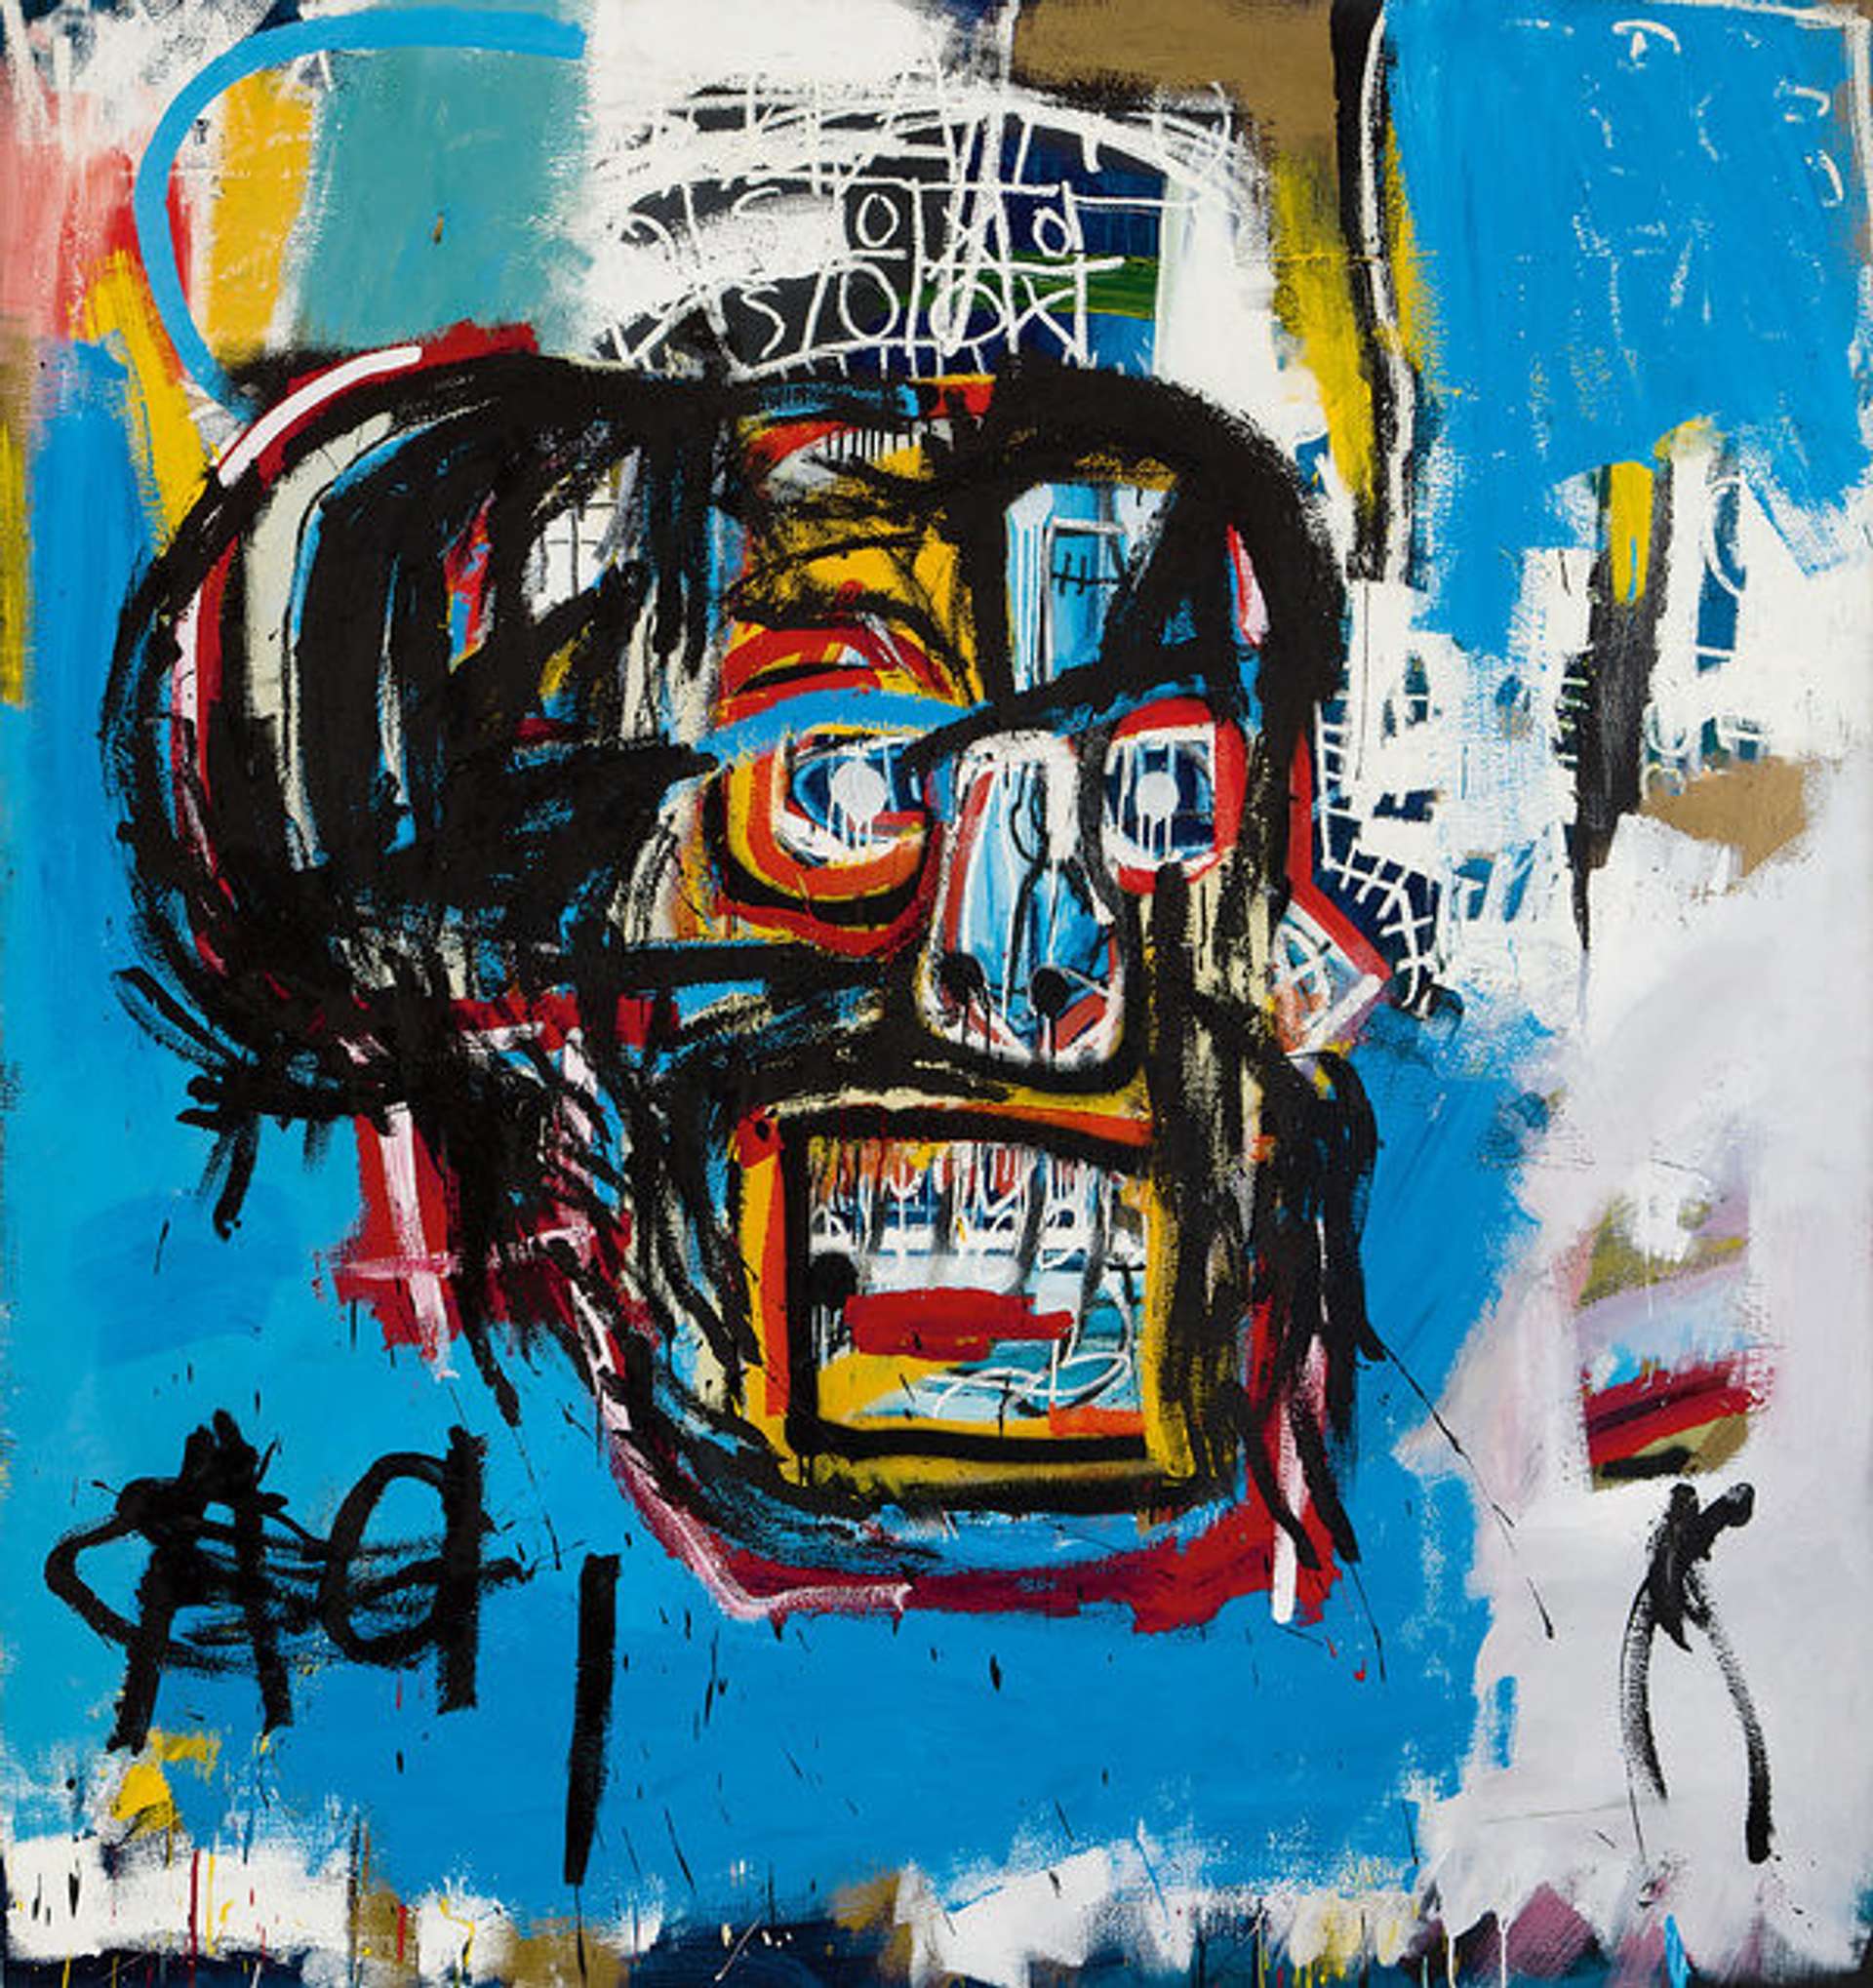 A painting titled "Untitled (Skull)" by Jean-Michel Basquiat, finished in 1981. The painting features a skull with a crown in Basquiat's signature bold style, surrounded by layers of text, symbols, and graffiti-like markings